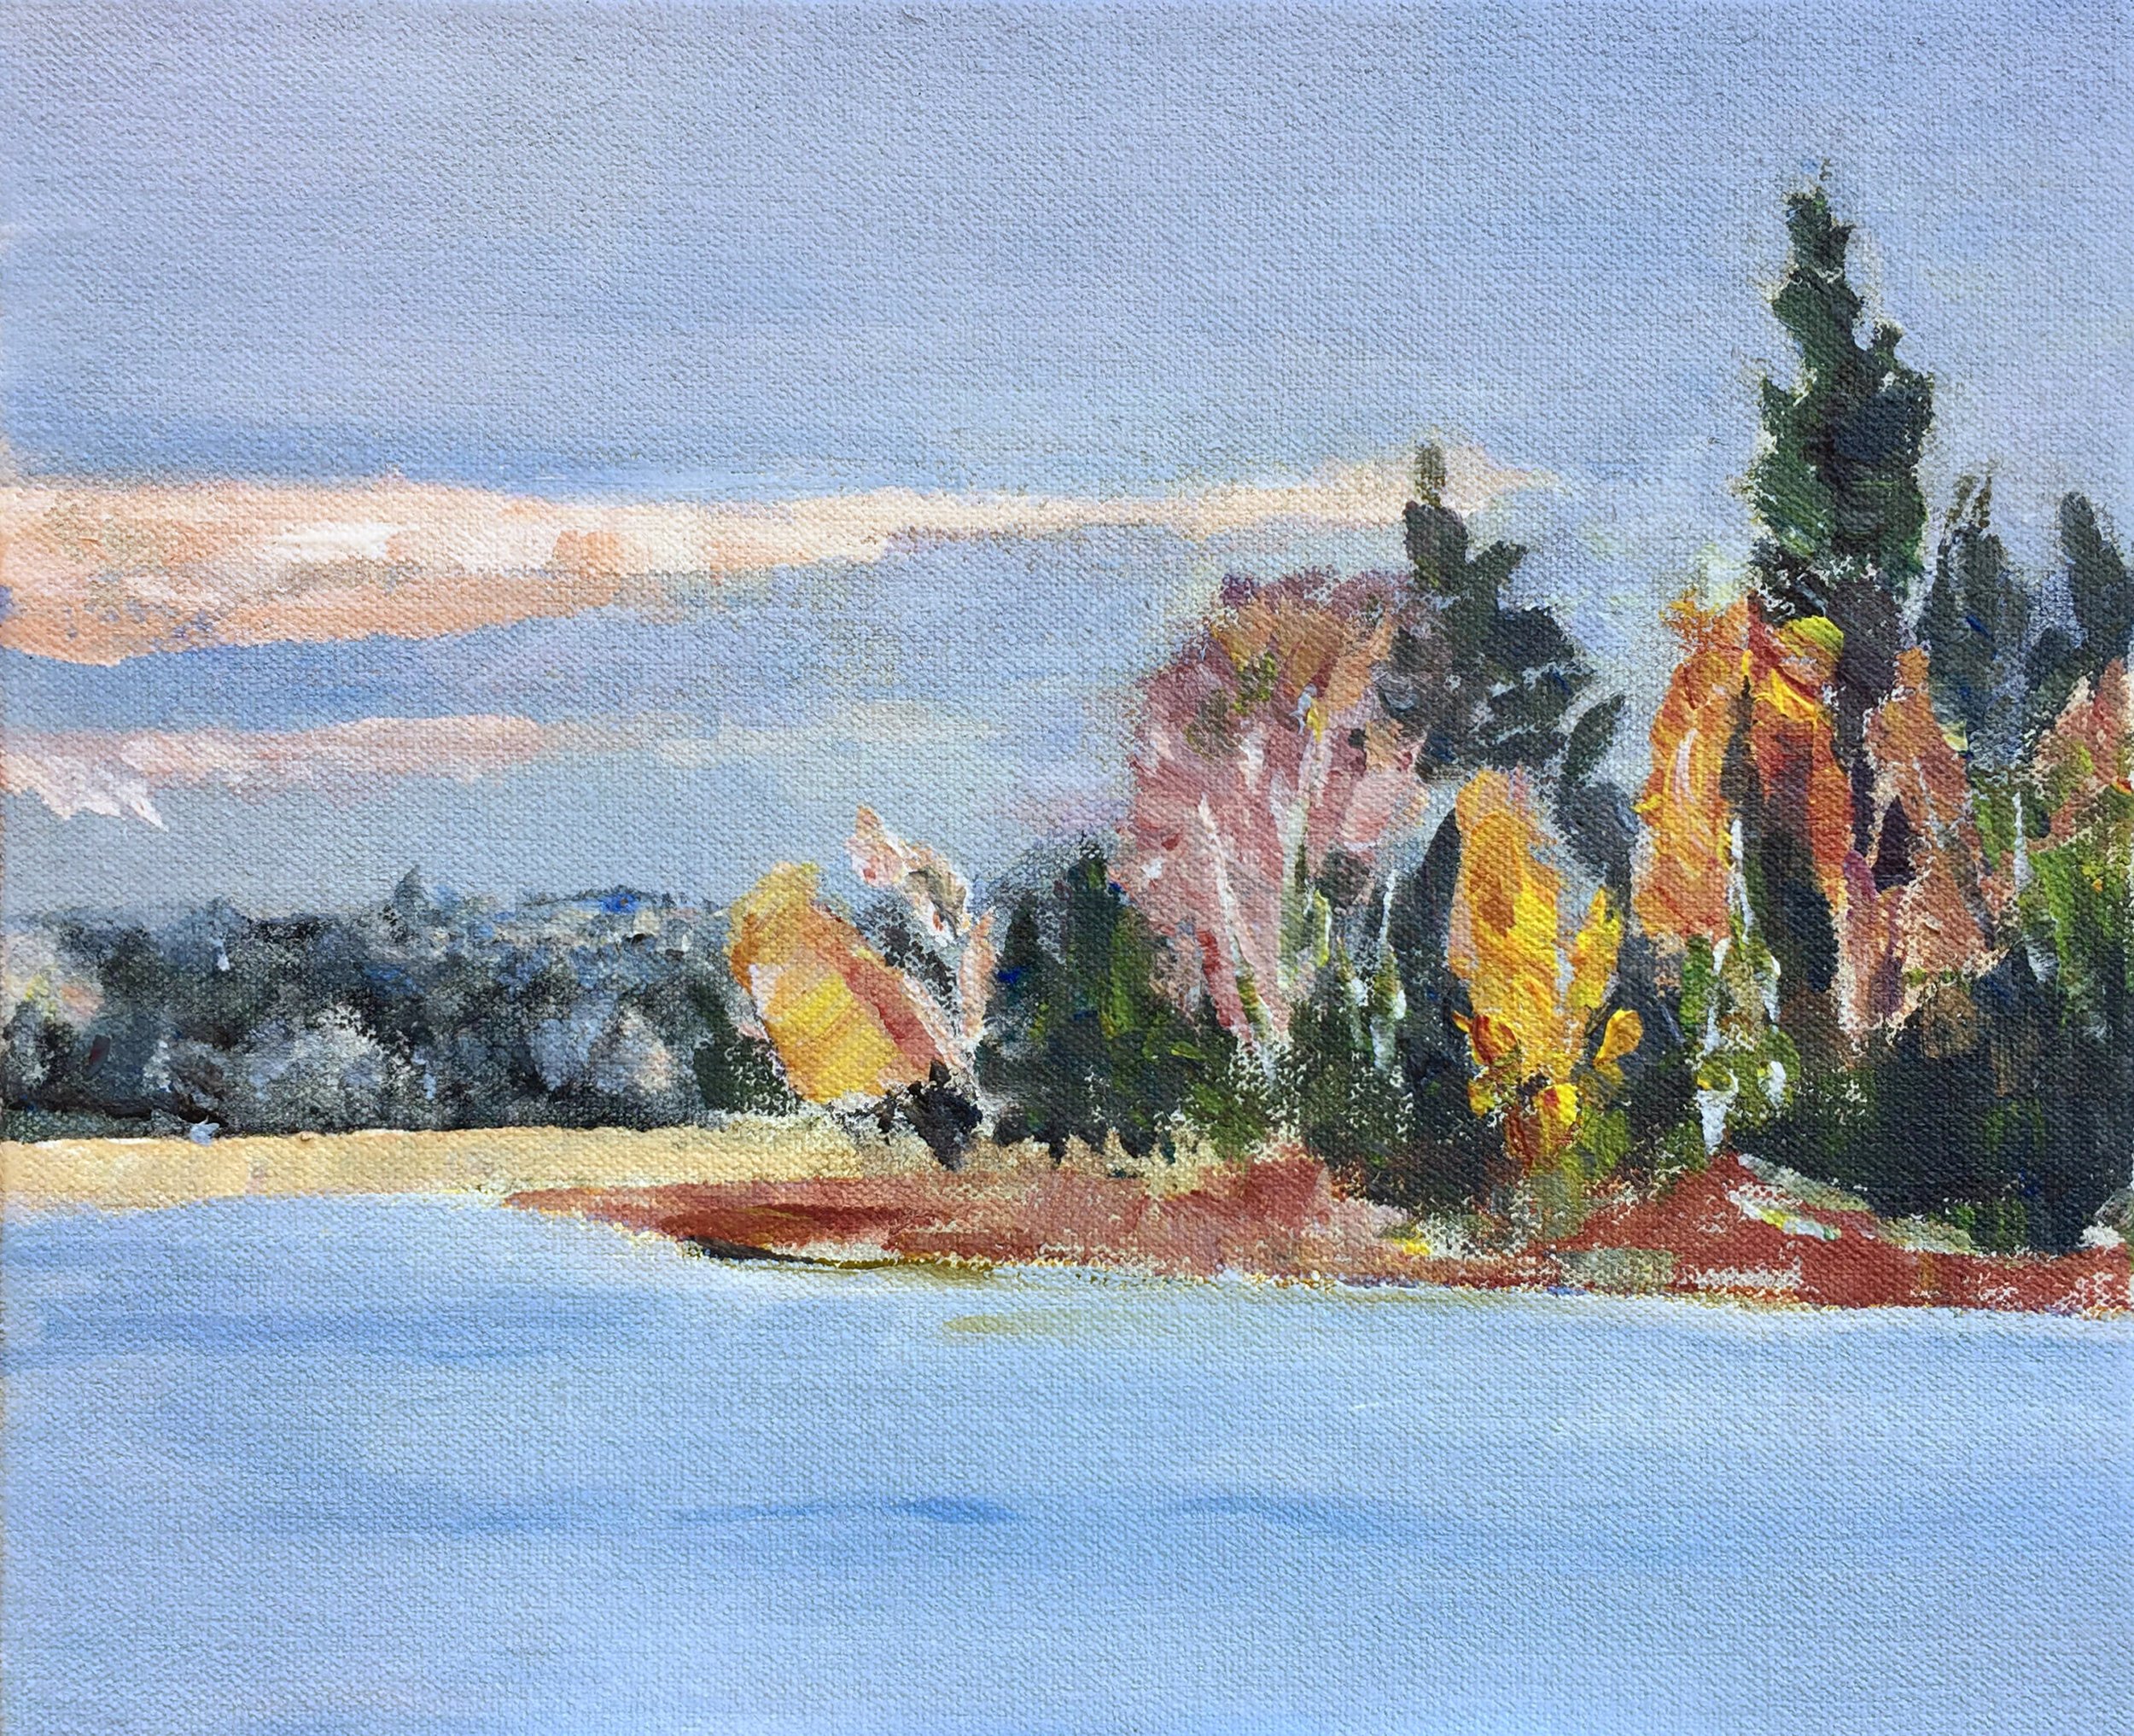 The Lakes Edge, 2012, 9 x 12 in., acrylic on canvas 